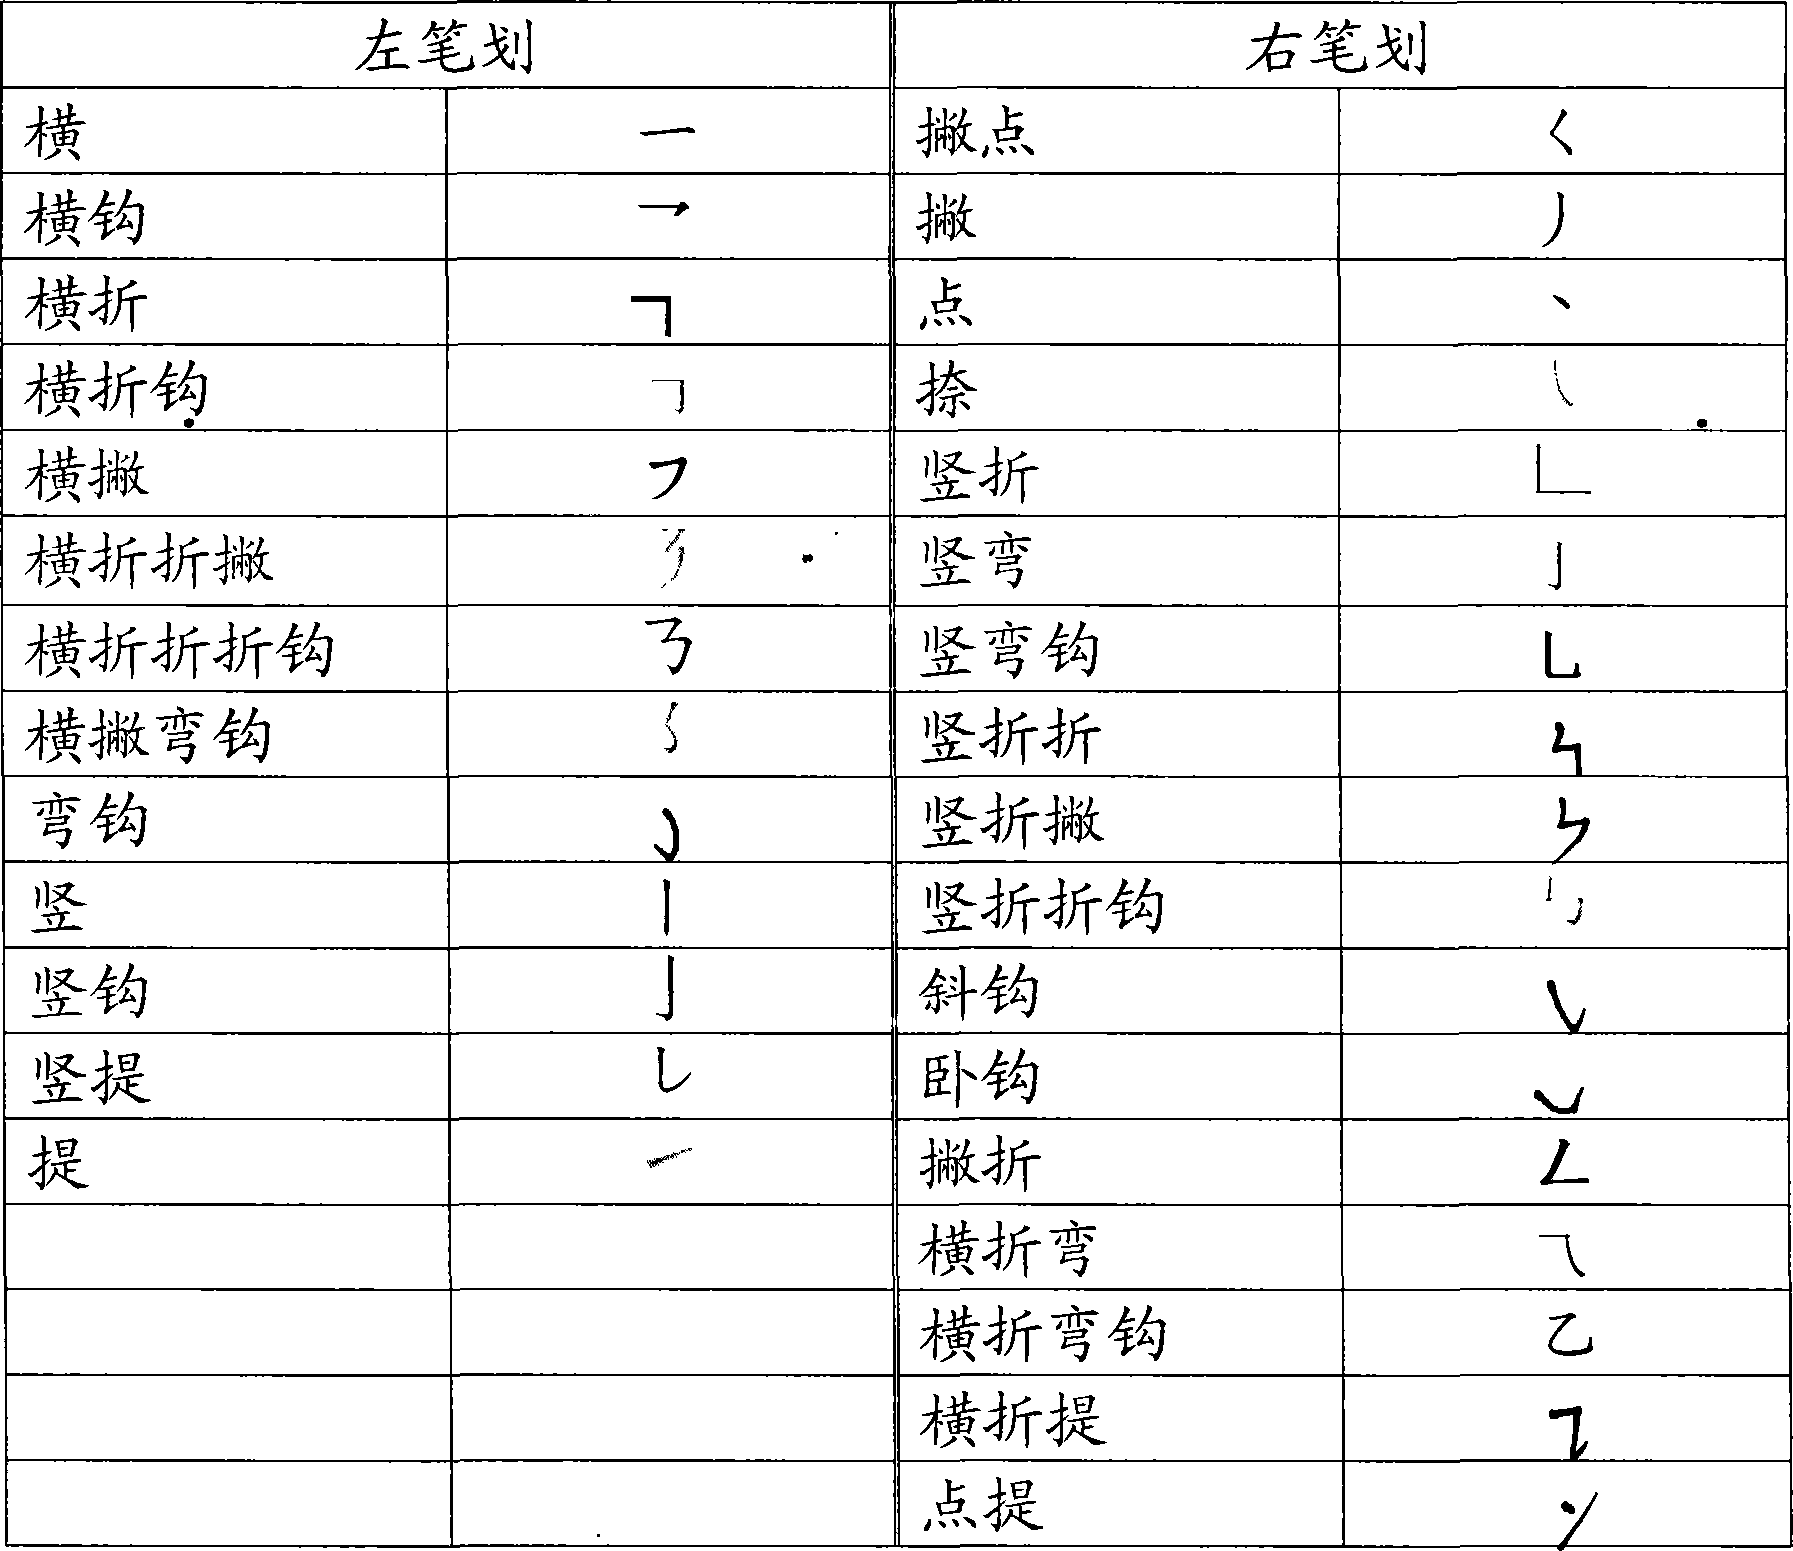 Chinese characters pen number-shape-number-symbol input method